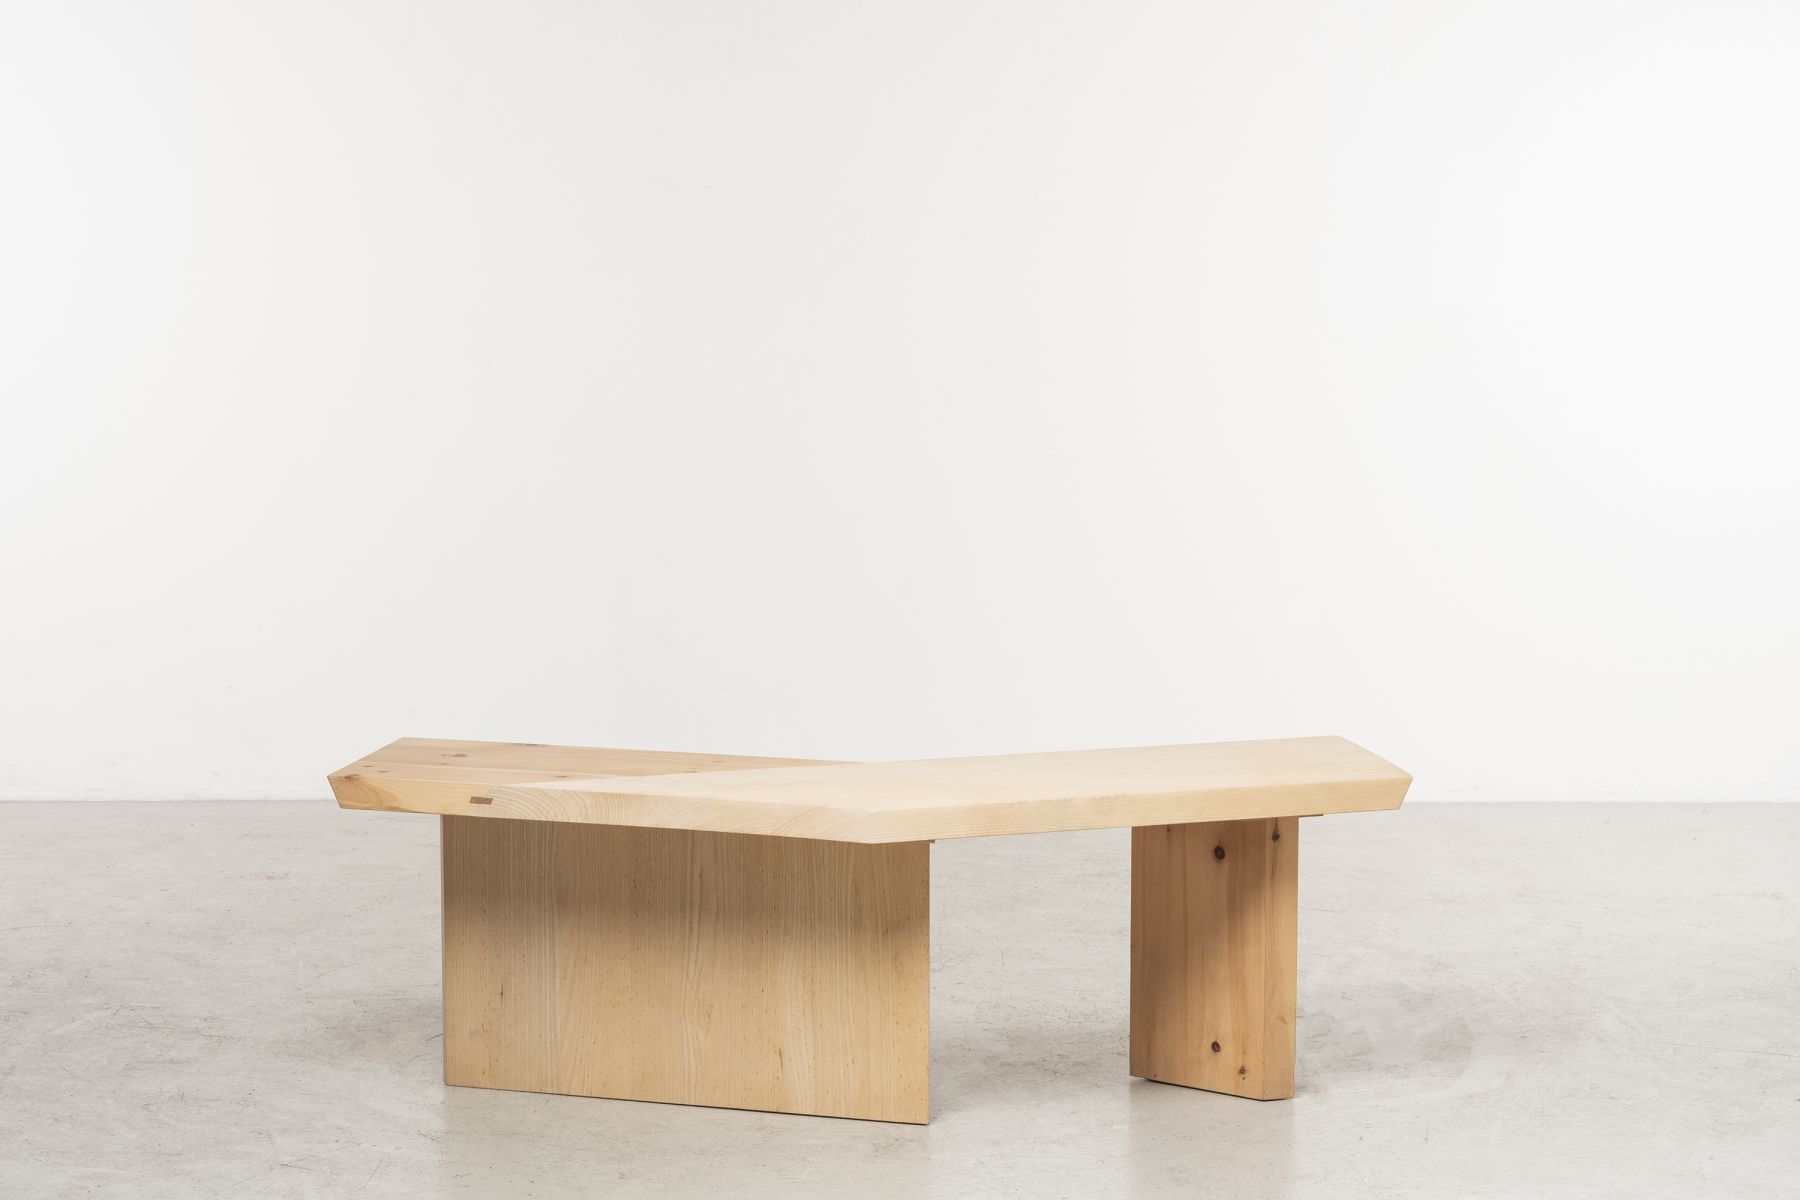 Low table Triennale collection Martino Gamper pic-4